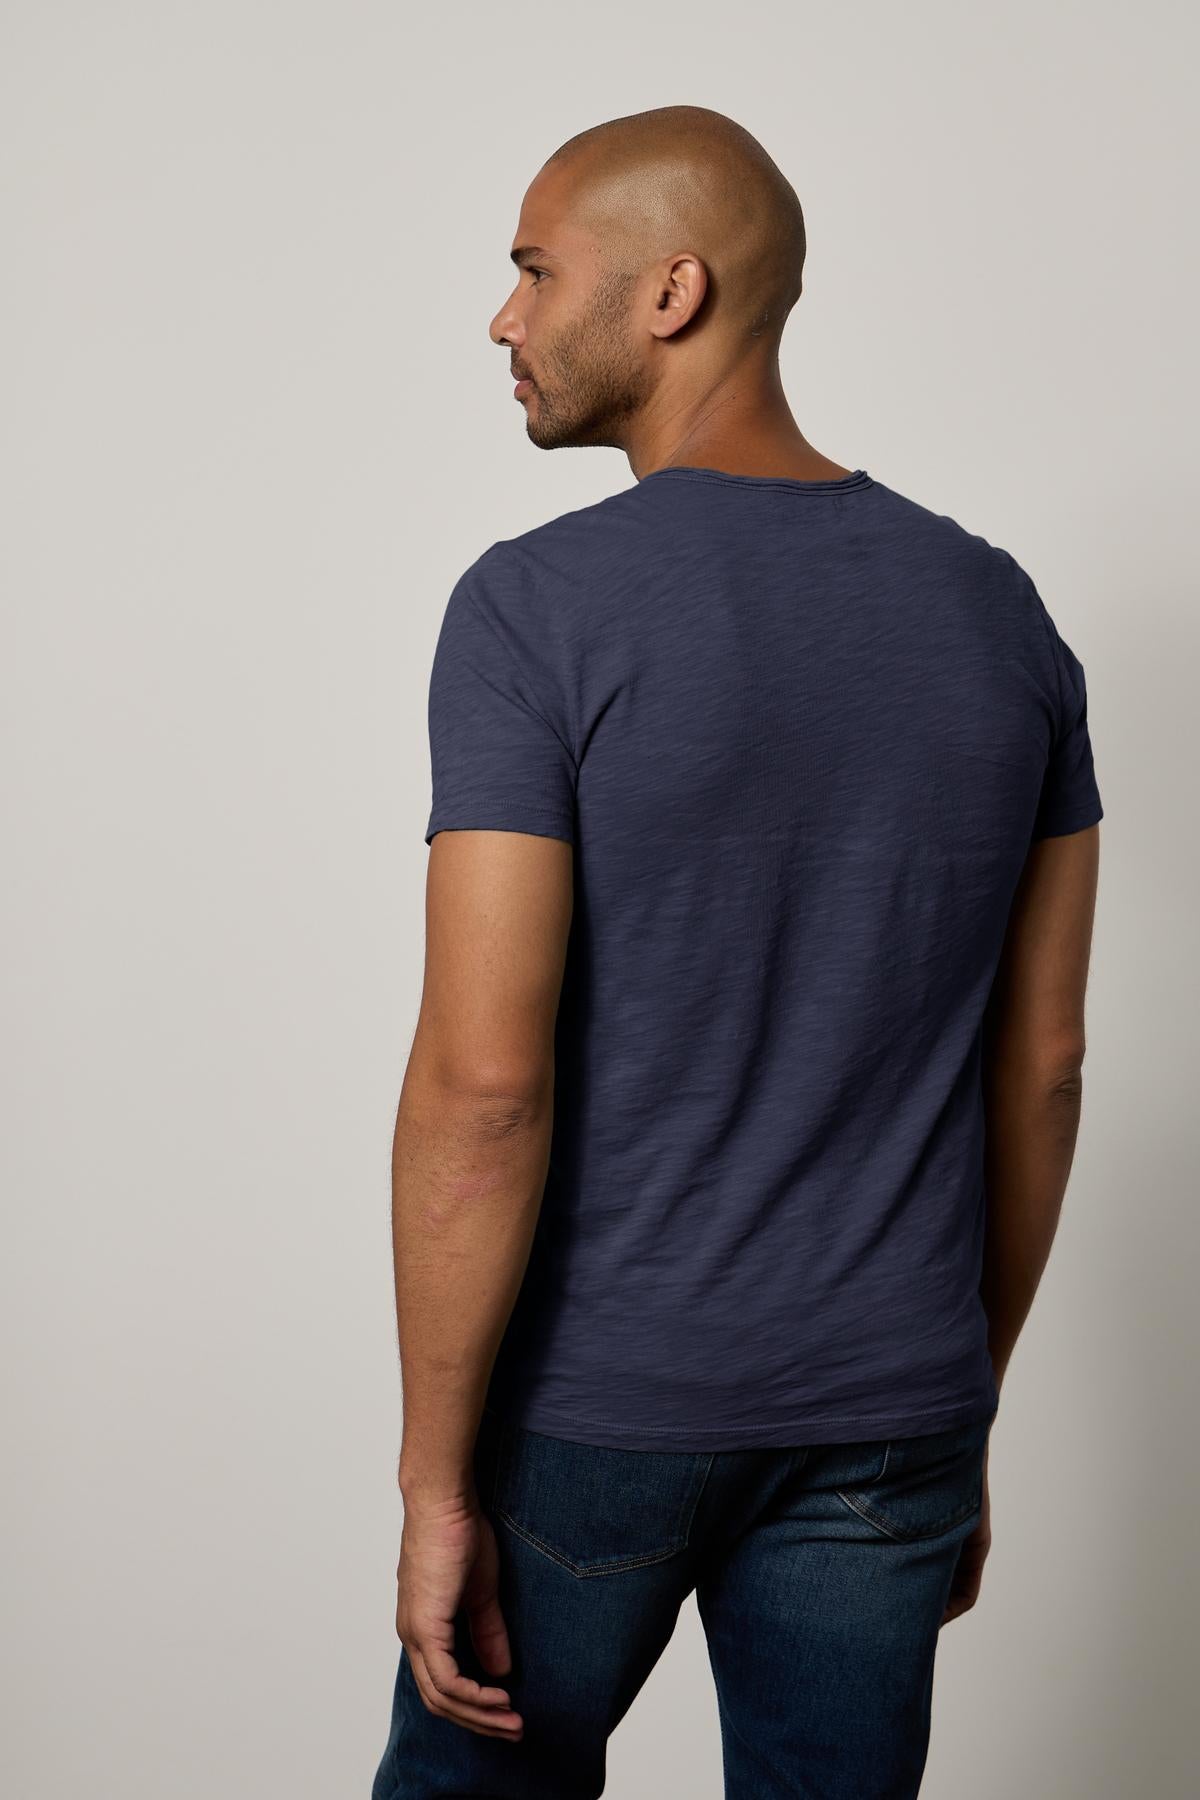   A bald man in a CHAD TEE from Velvet by Graham & Spencer with raw-edge details and jeans stands turned to the side against a neutral background. 